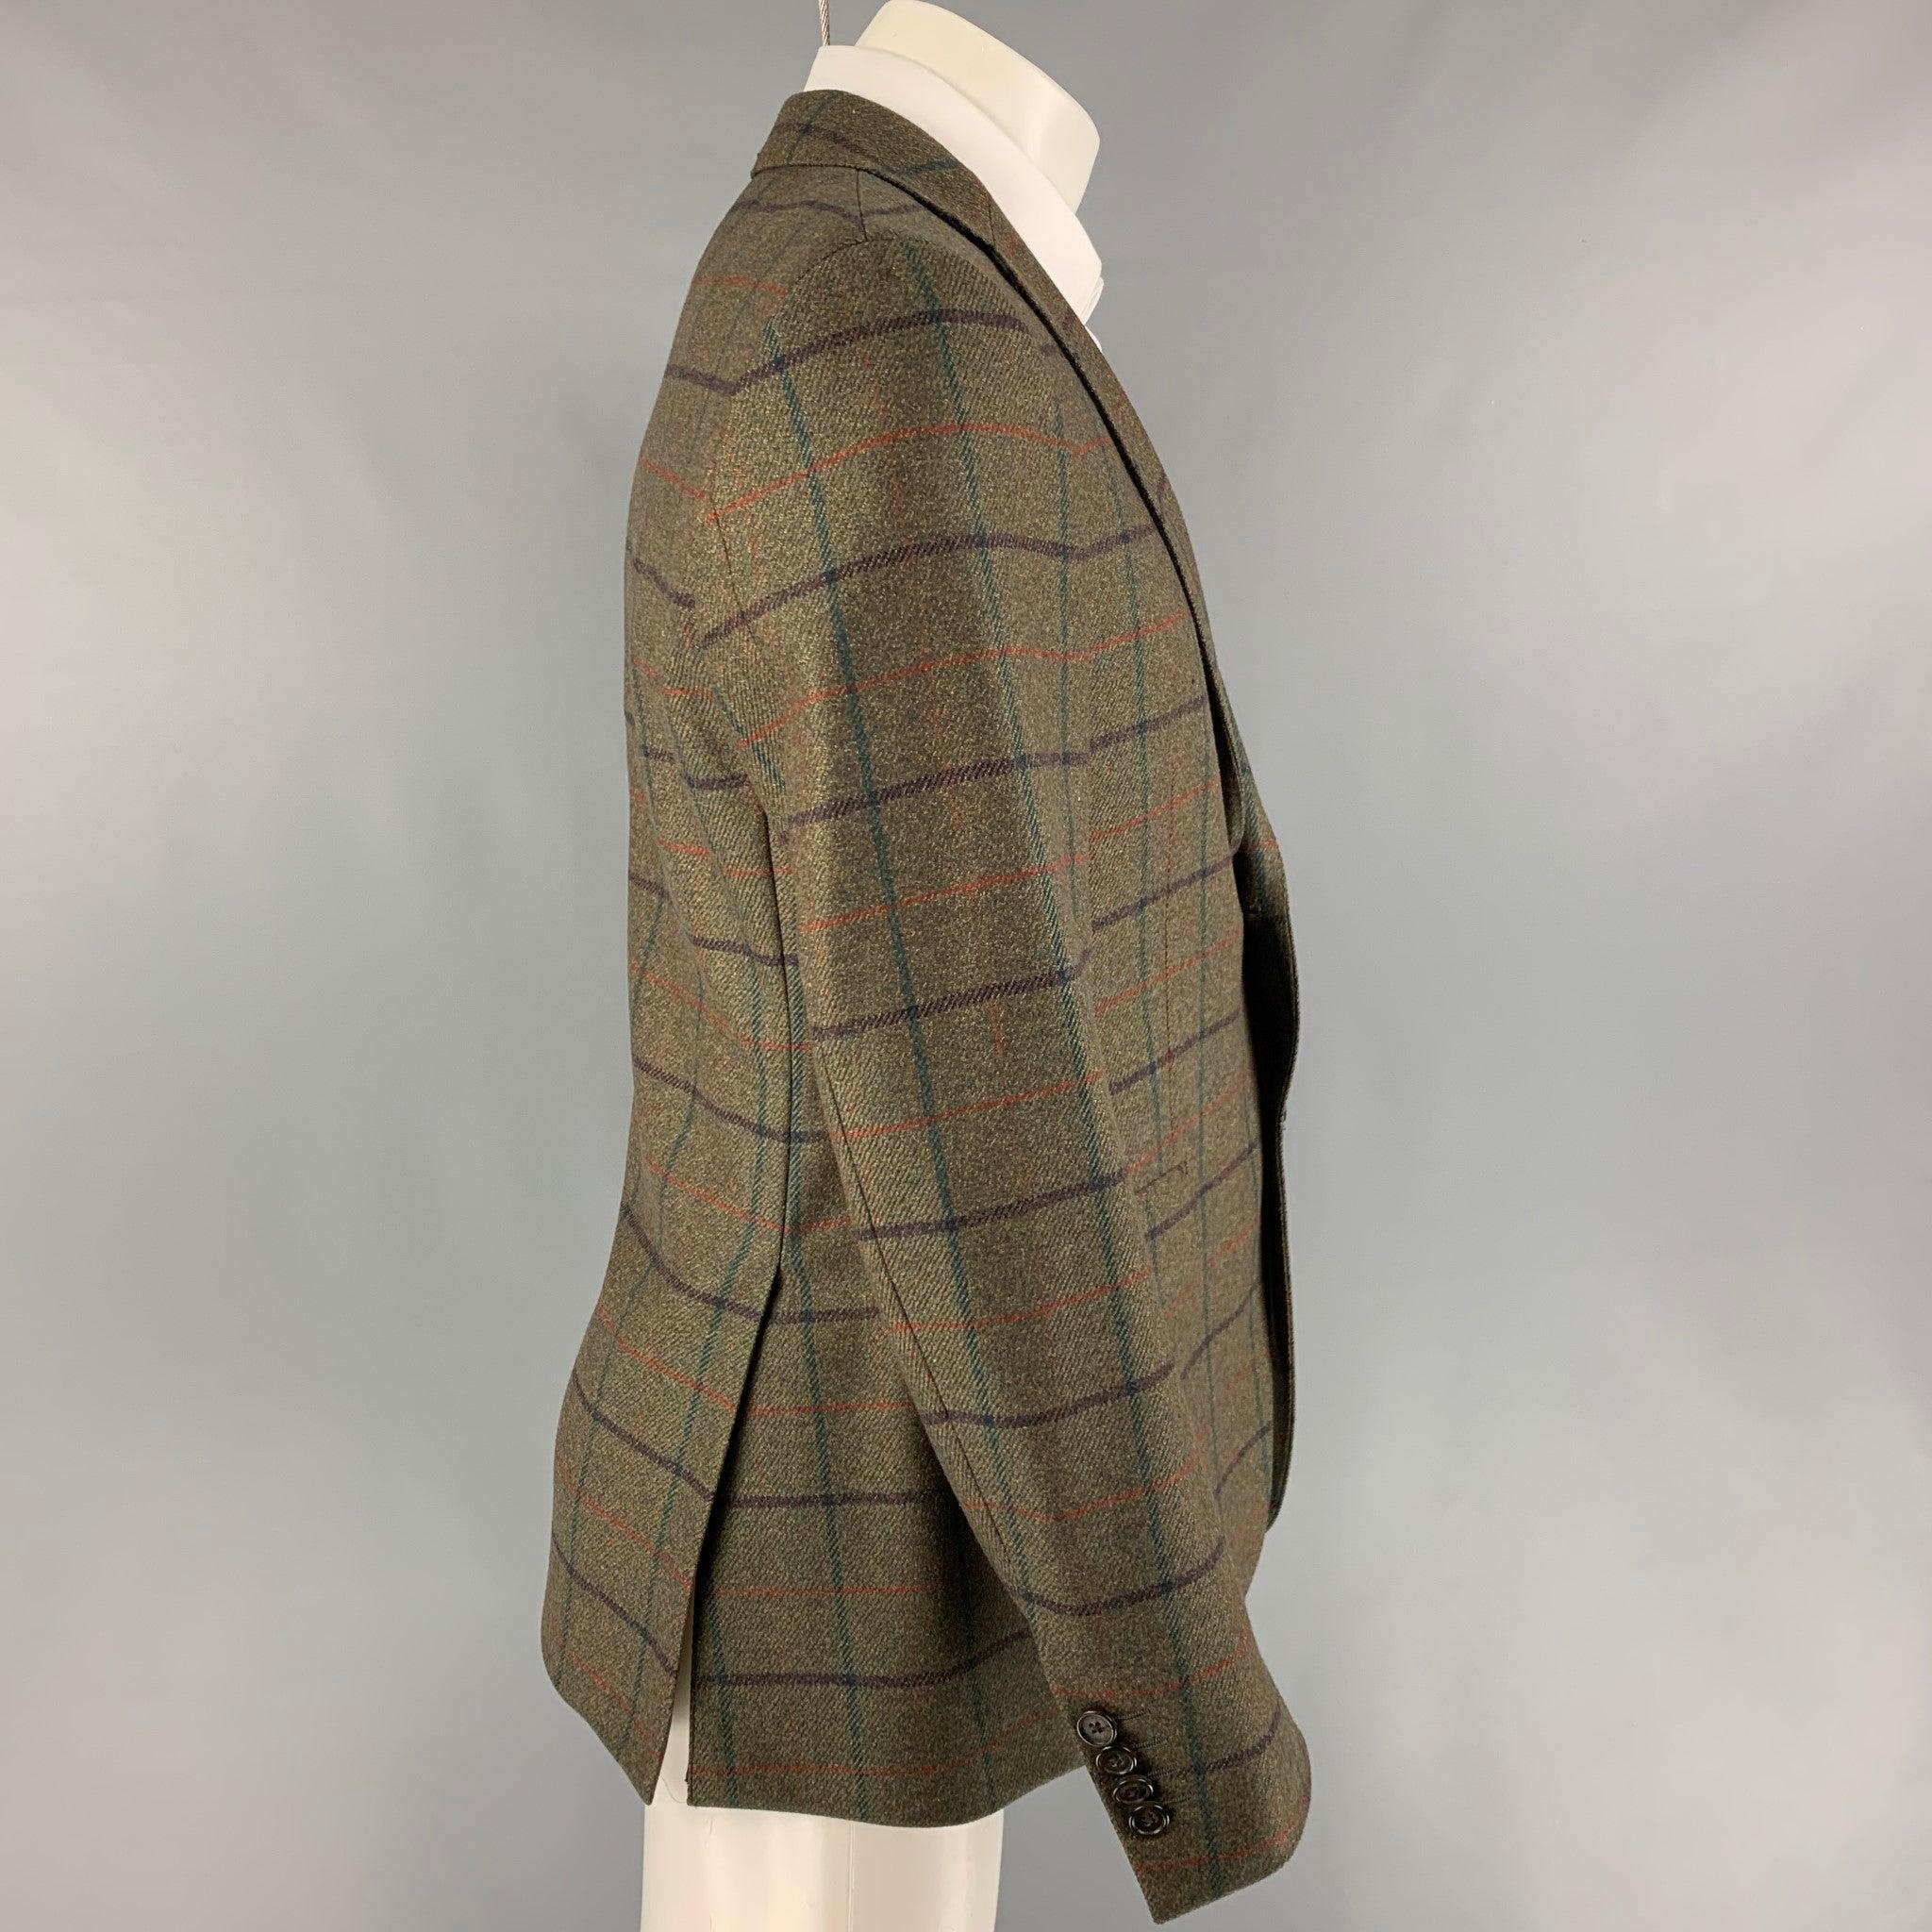 ETRO sport coat comes in a olive window pane wool with a full liner featuring a notch lapel, flap pockets, double back vent, and a double button closure. Made in Italy.
Very Good
Pre-Owned Condition. 

Marked:   48 

Measurements: 
 
Shoulder: 17.5